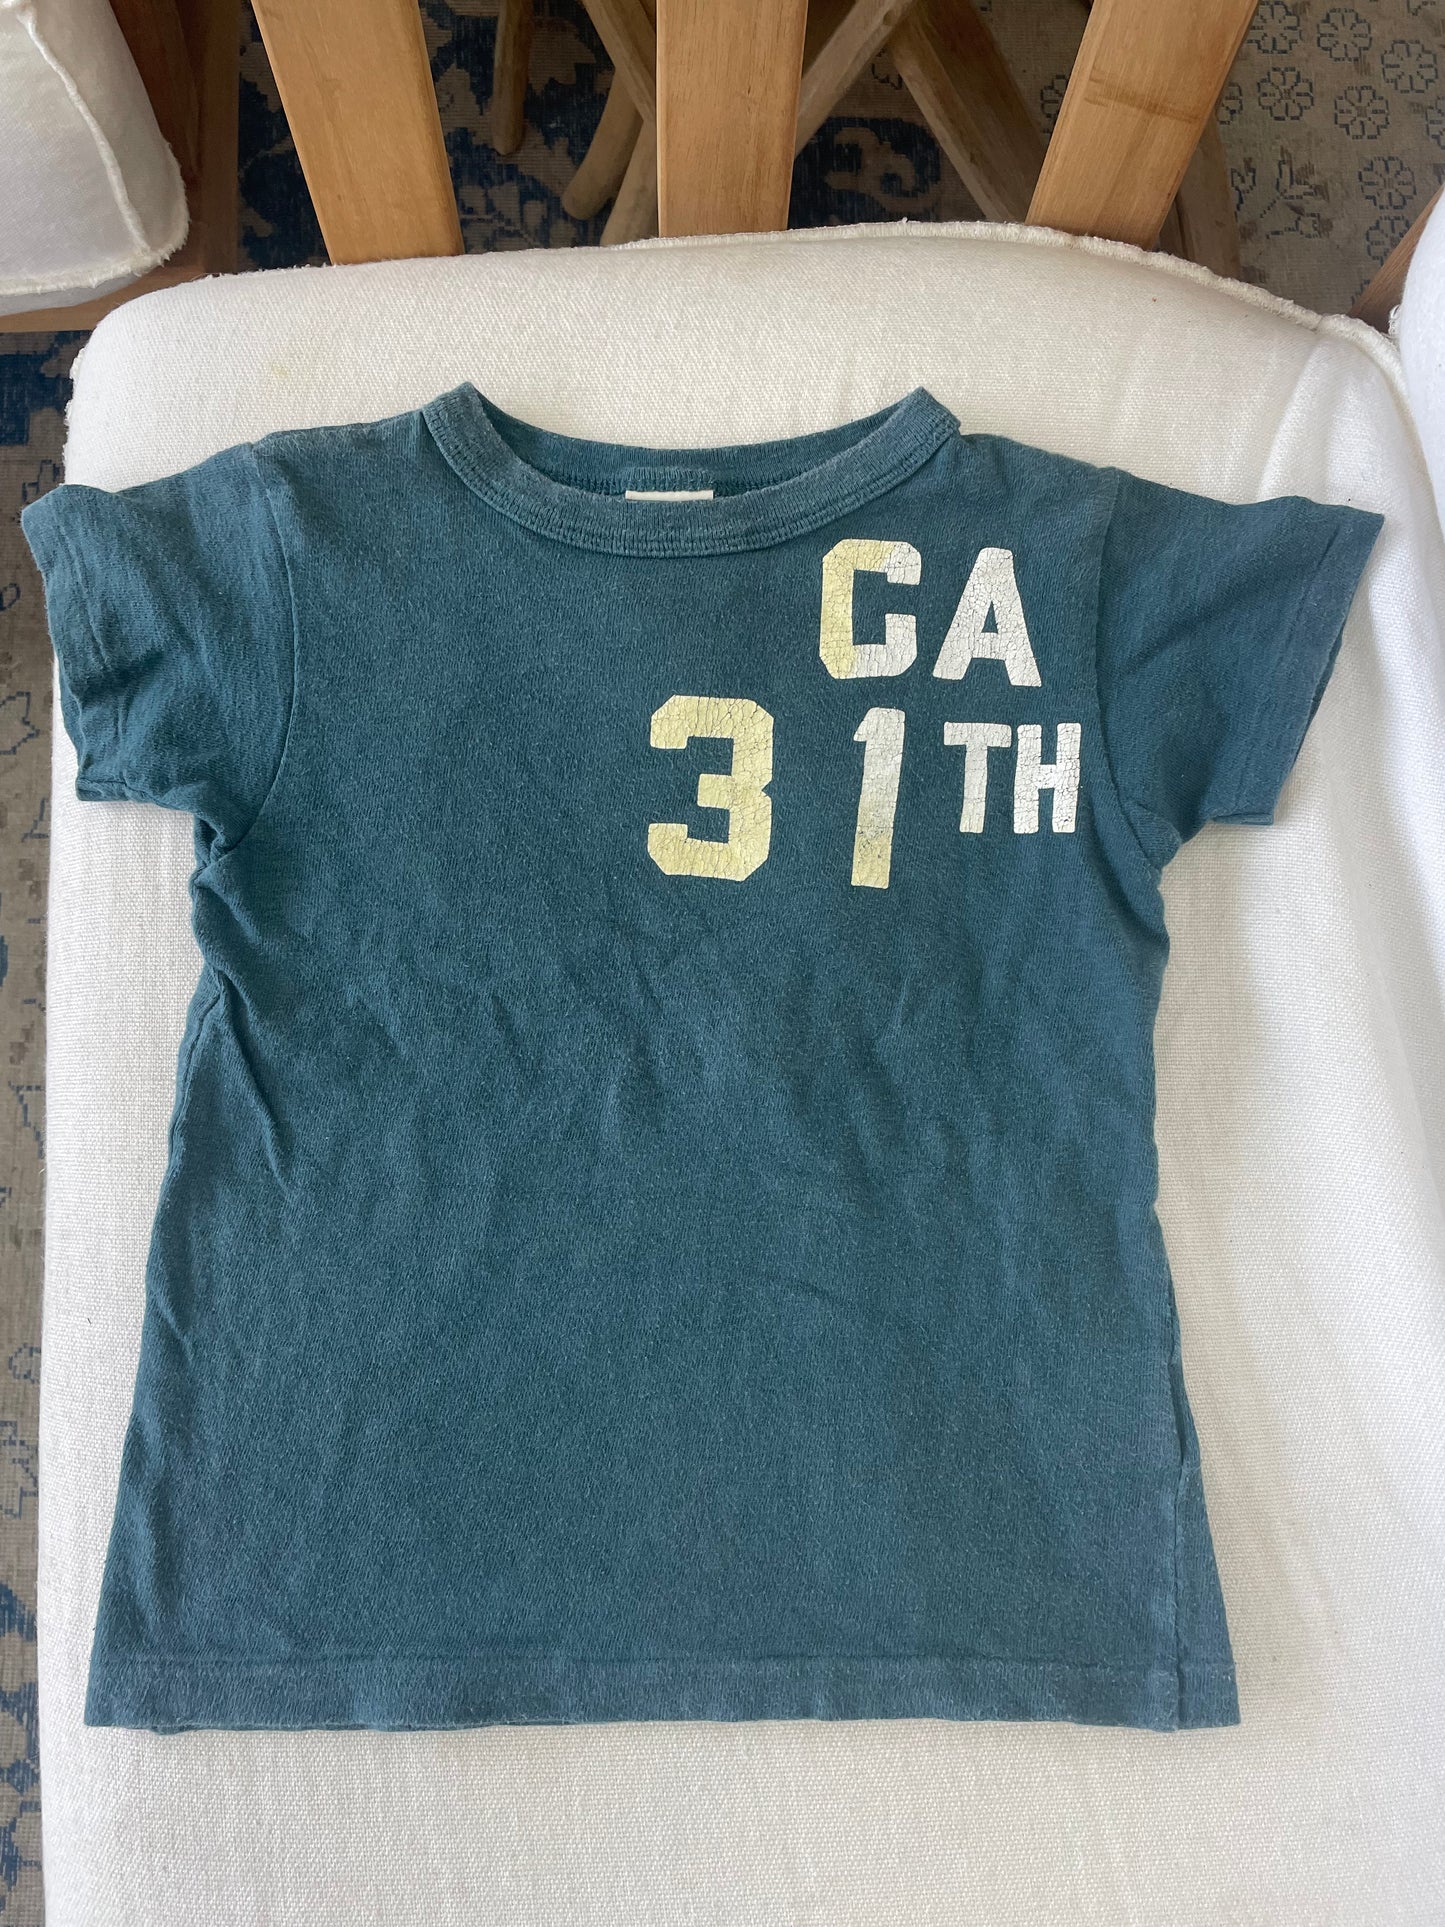 L.A. Teal Baby Tee